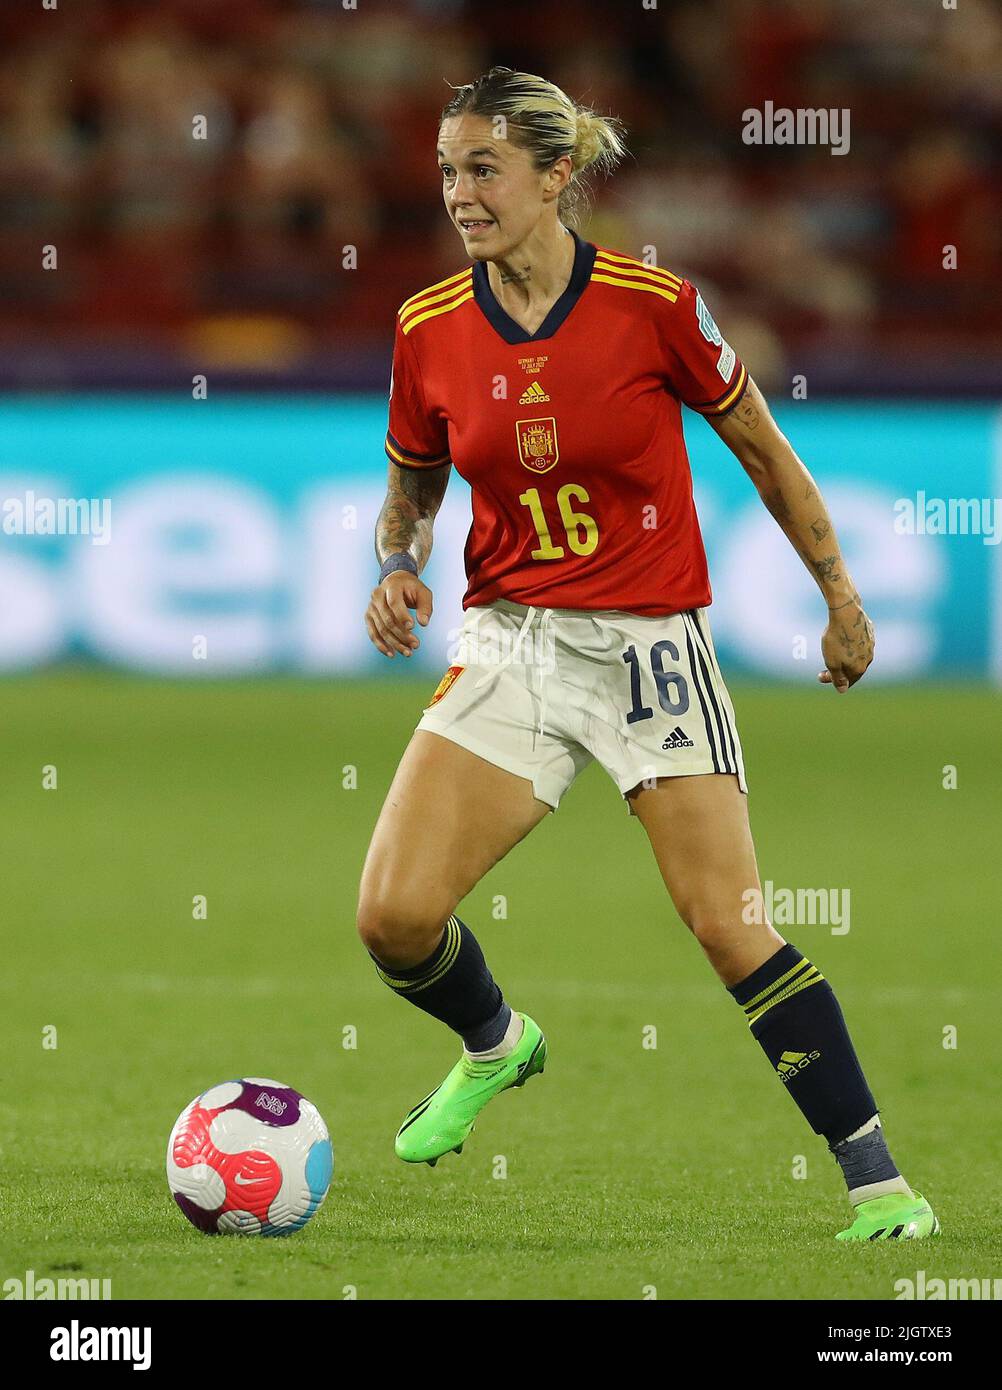 London, England, 12th July 2022. Mapi Leon of Spain during the UEFA Women's European Championship 2022 match at Brentford Community Stadium, London. Picture credit should read: Paul Terry / Sportimage Stock Photo